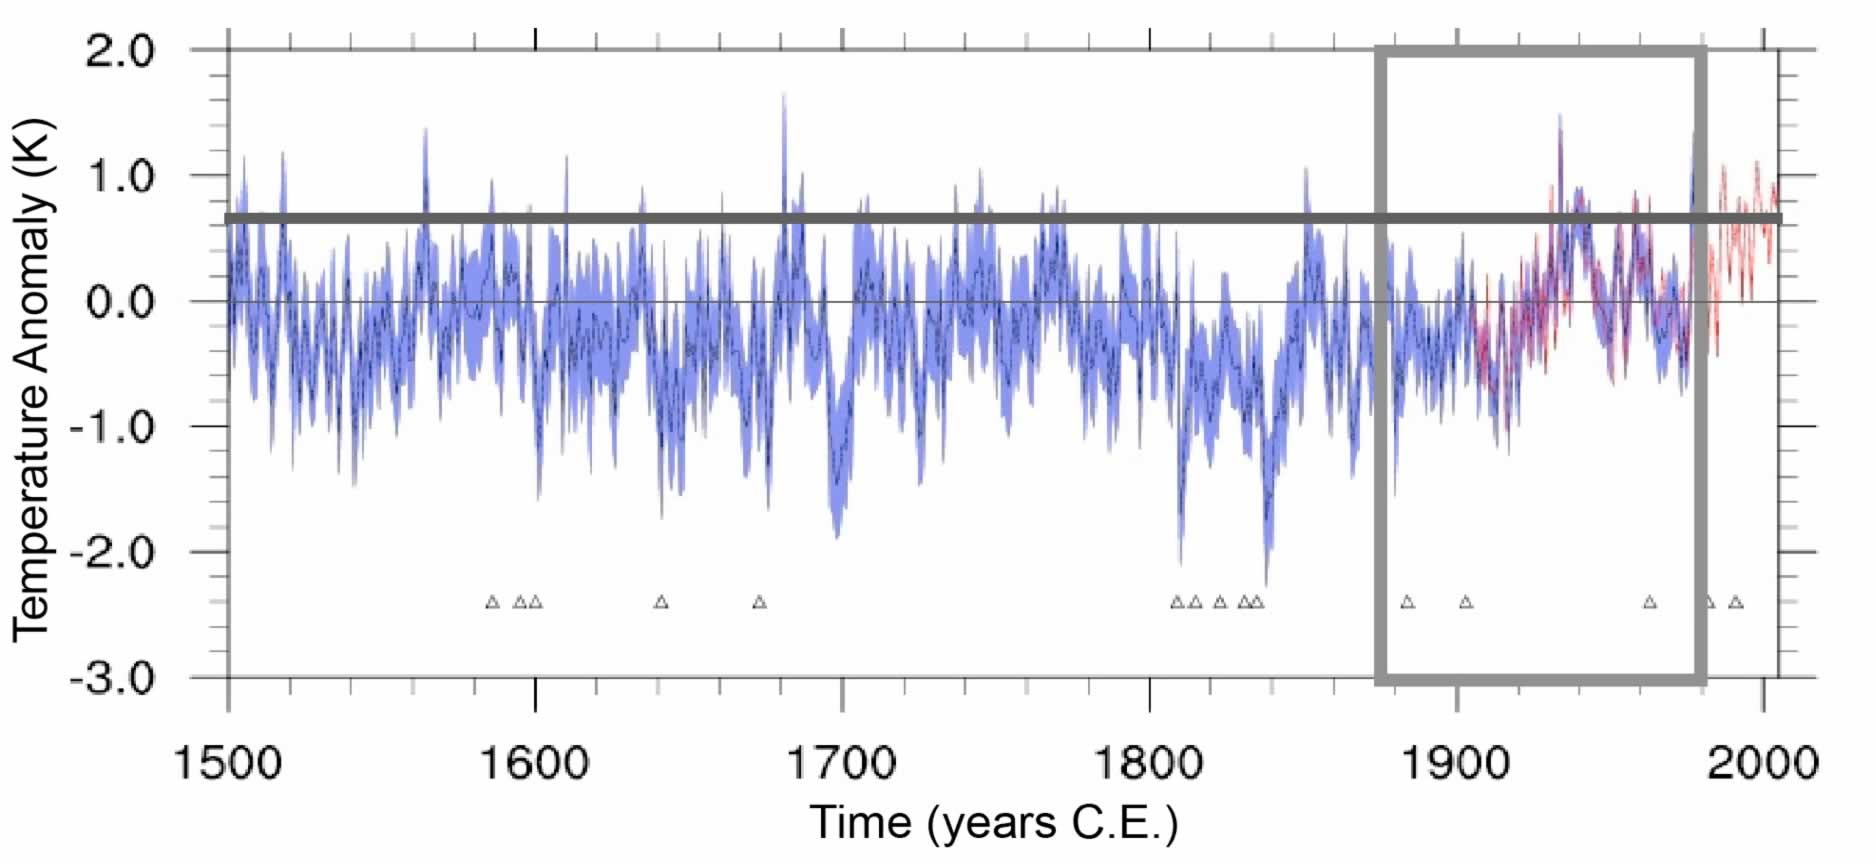 Annual regional mean time series reconstruction for western North America (30-55N, 95-130W), as anomalies from the calibration period (1904-1980) mean. (graph by C. Ammann and E. Wahl)